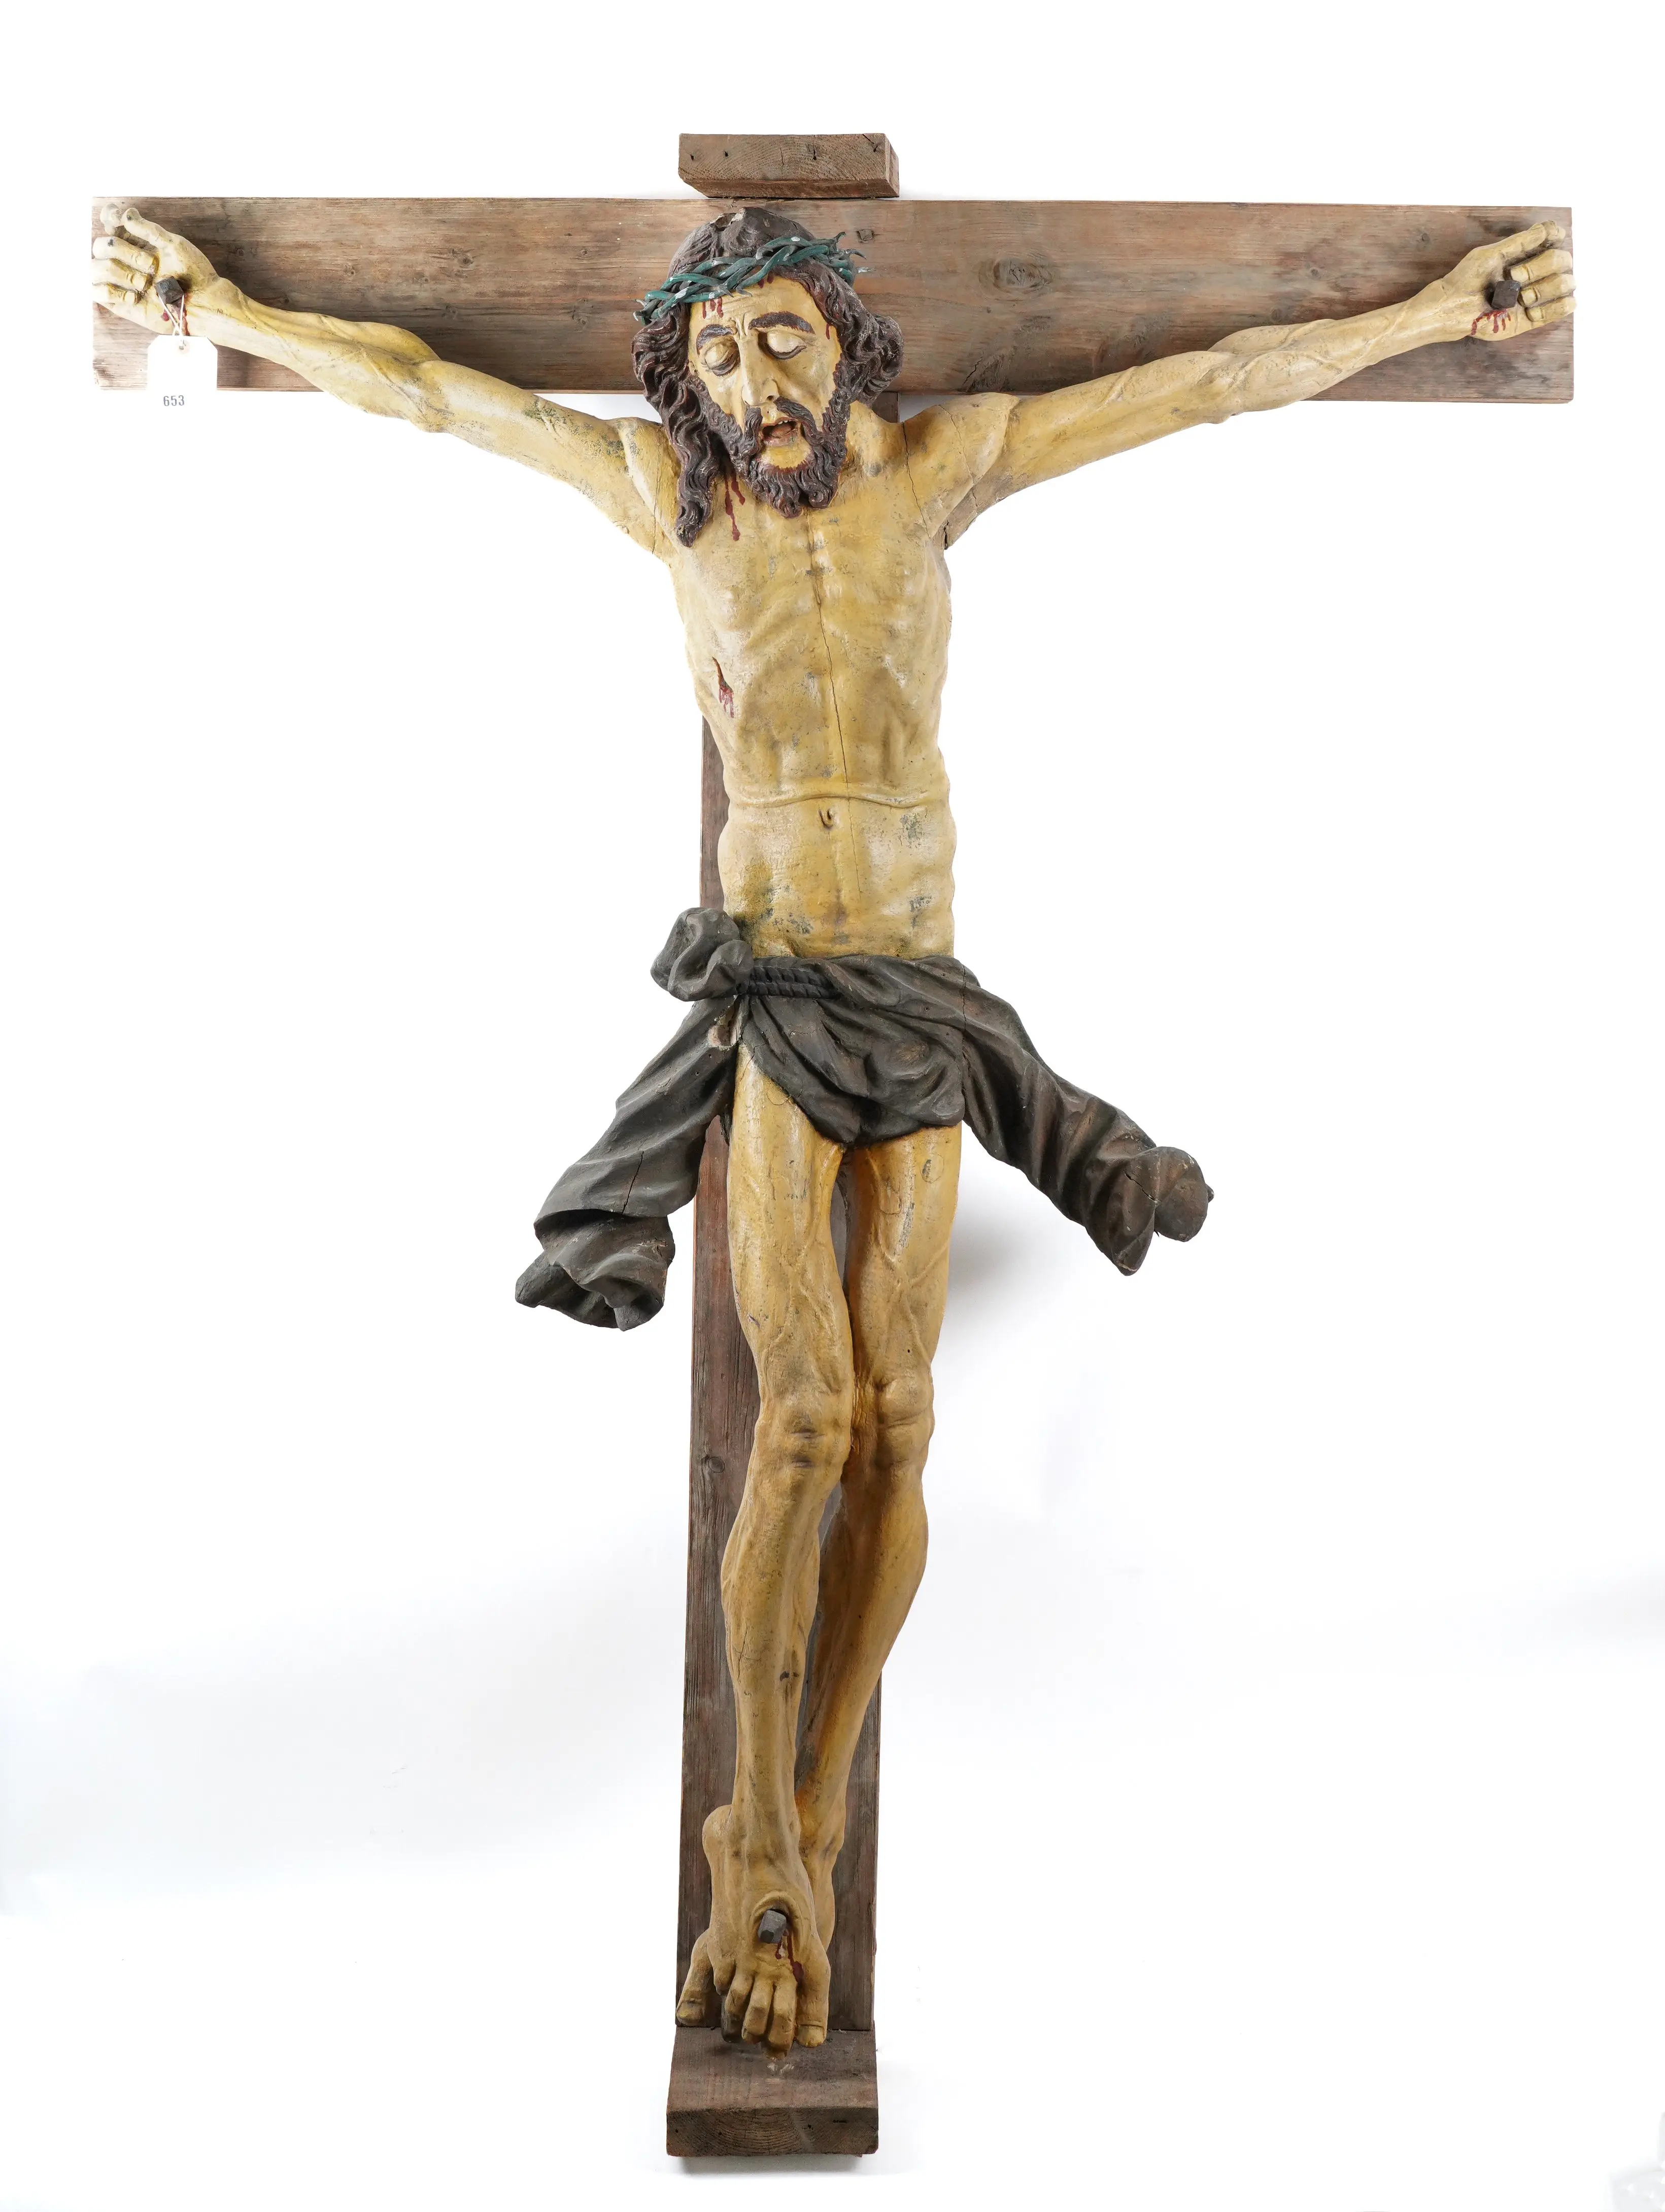 A SOUTH GERMAN / AUSTRIAN CARVED POLYCHROME SCULPTURE OF THE CRUCIFIXION OR CHRIST ON THE CROSS